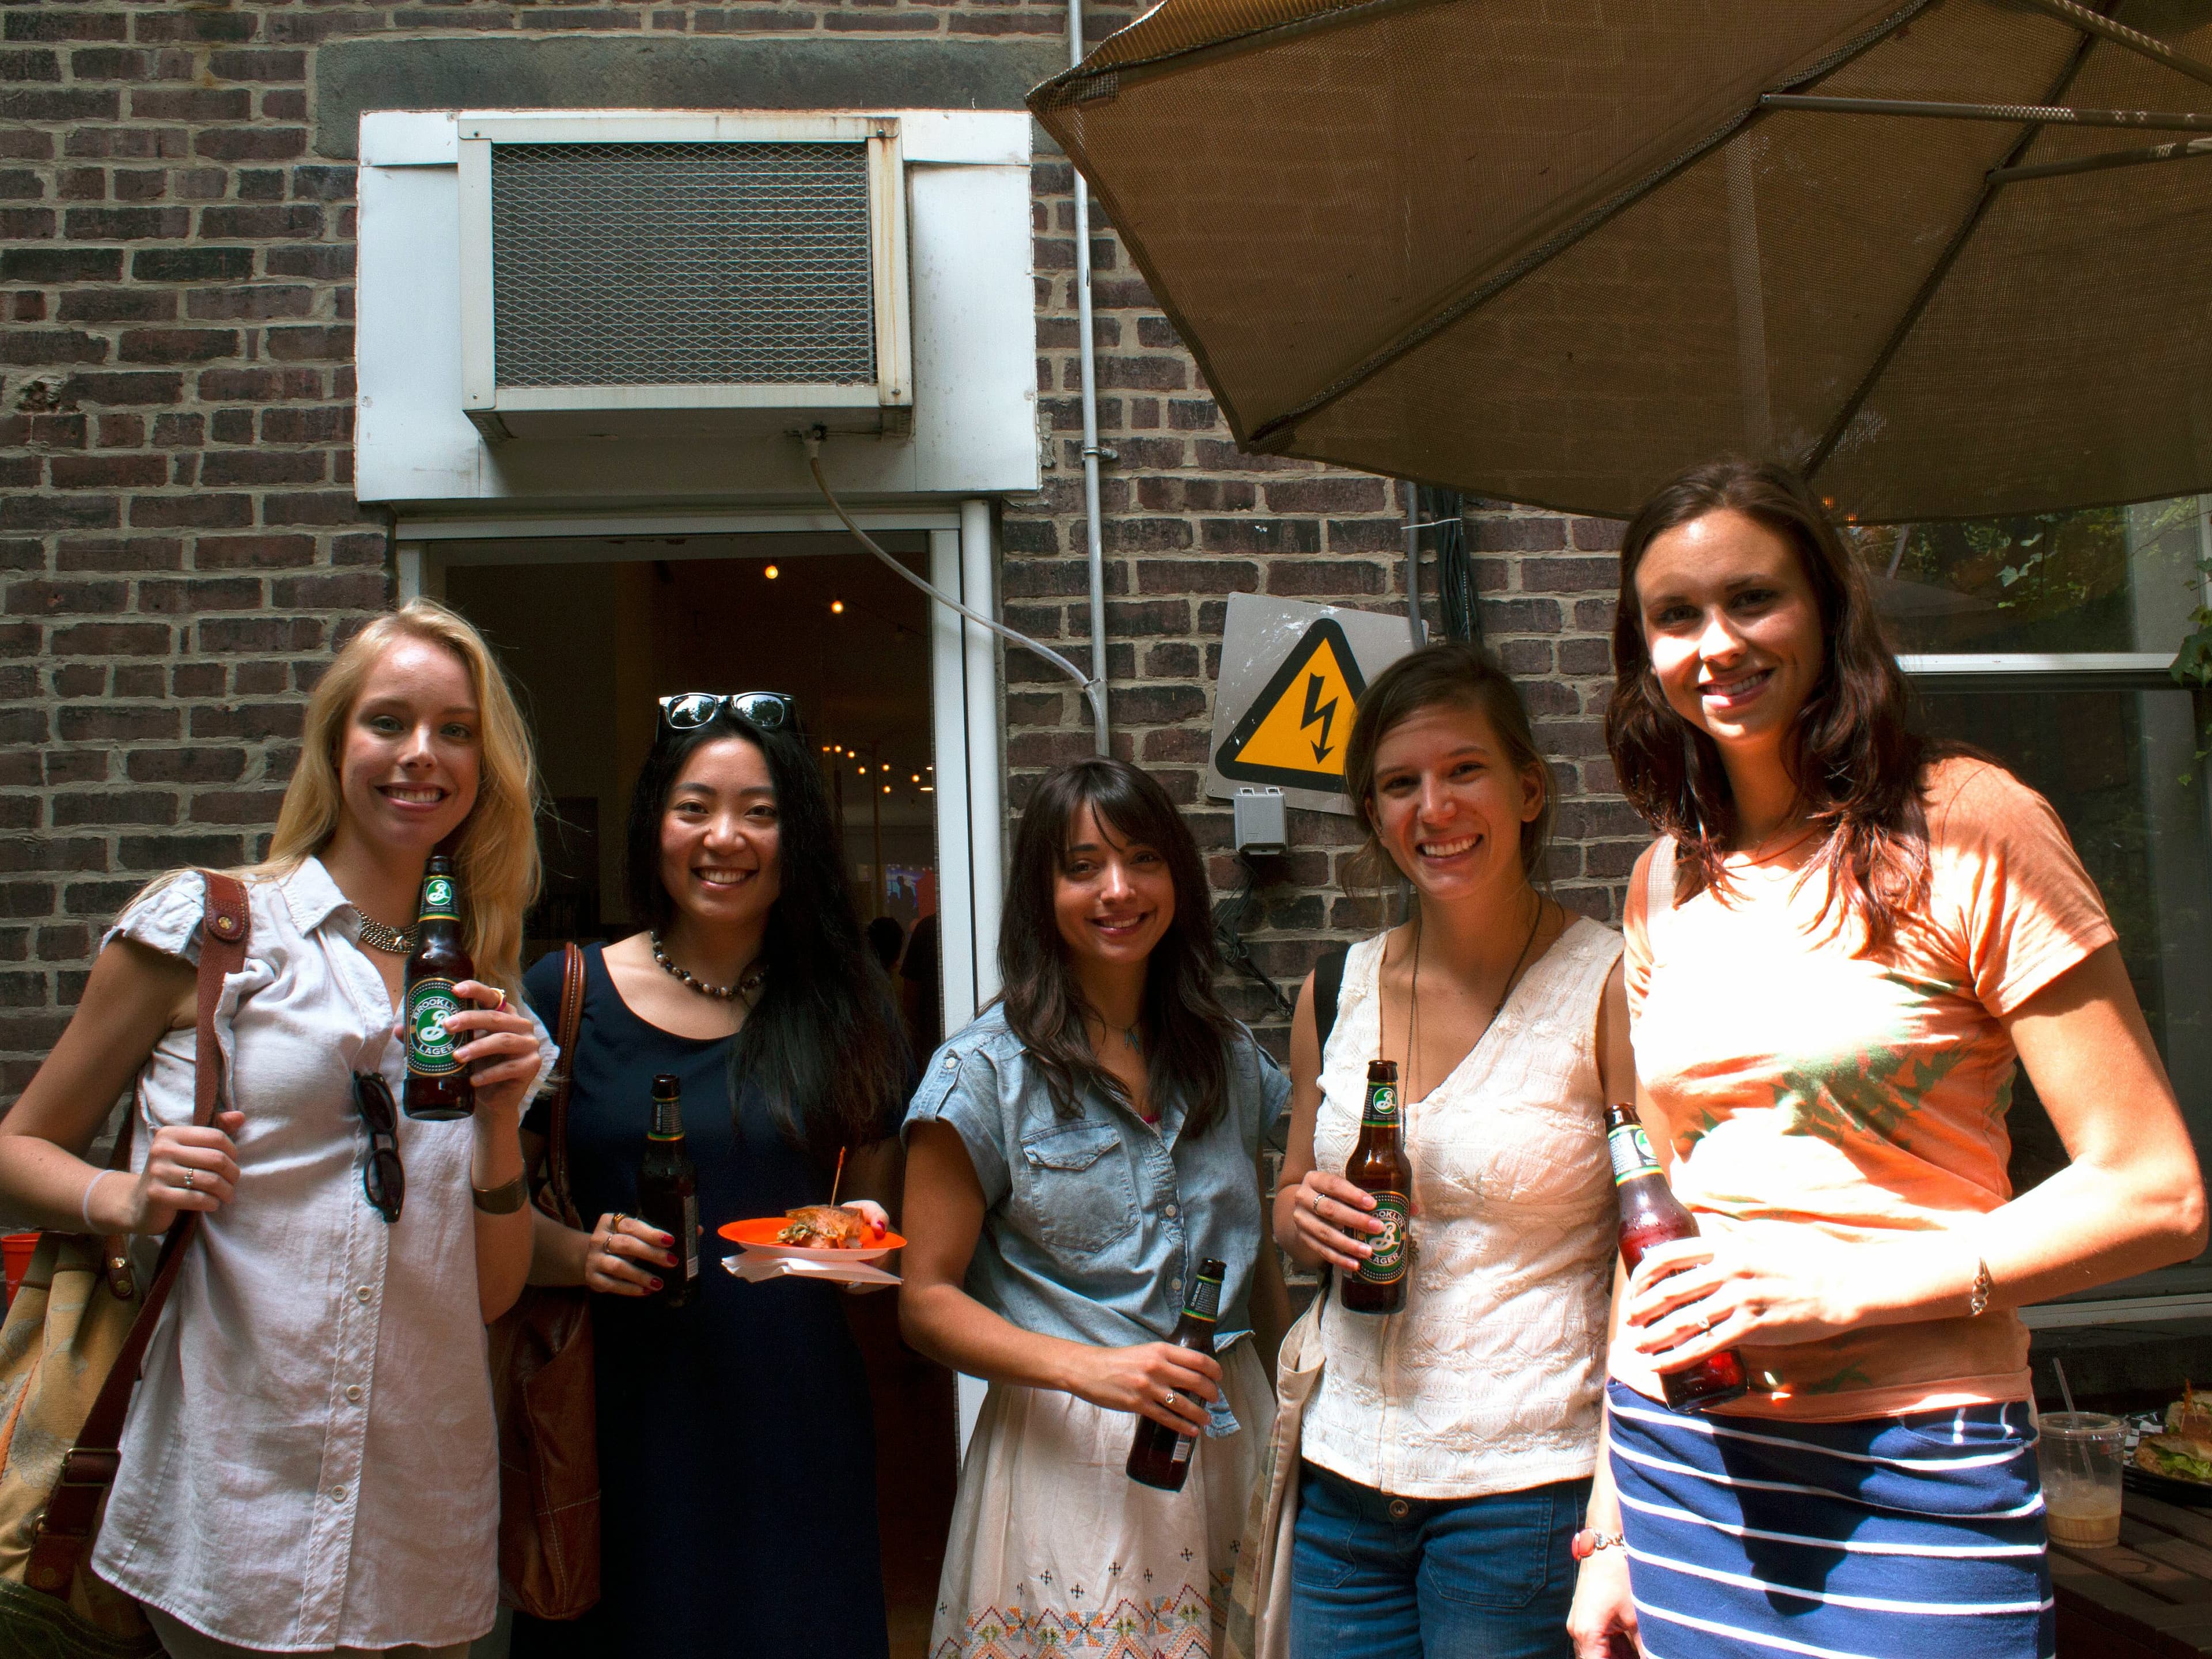 Five women are standing together under an umbrella outside, holding drinks and smiling at the camera. One of them holds a plate of food. A brick wall with an air conditioning unit and a yellow caution sign is in the background.